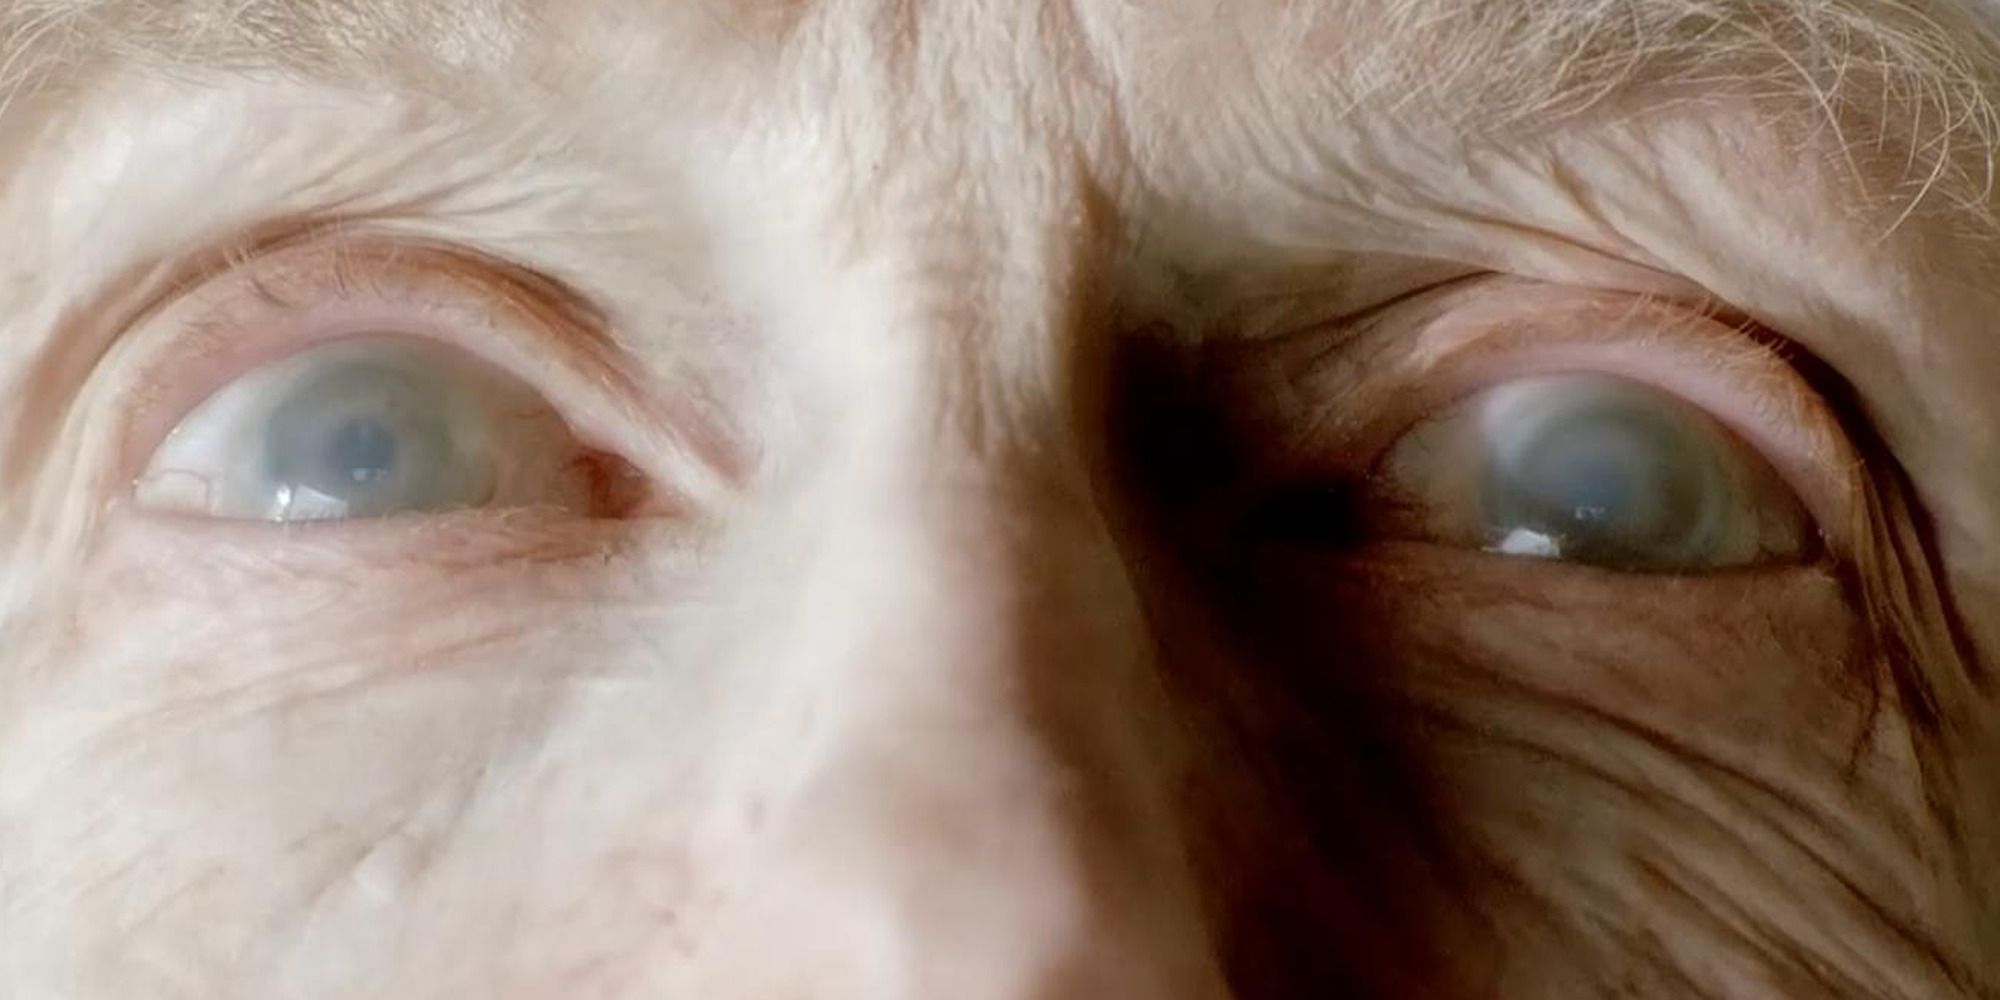 An old person's blind eyes in 'Six Feet Under'